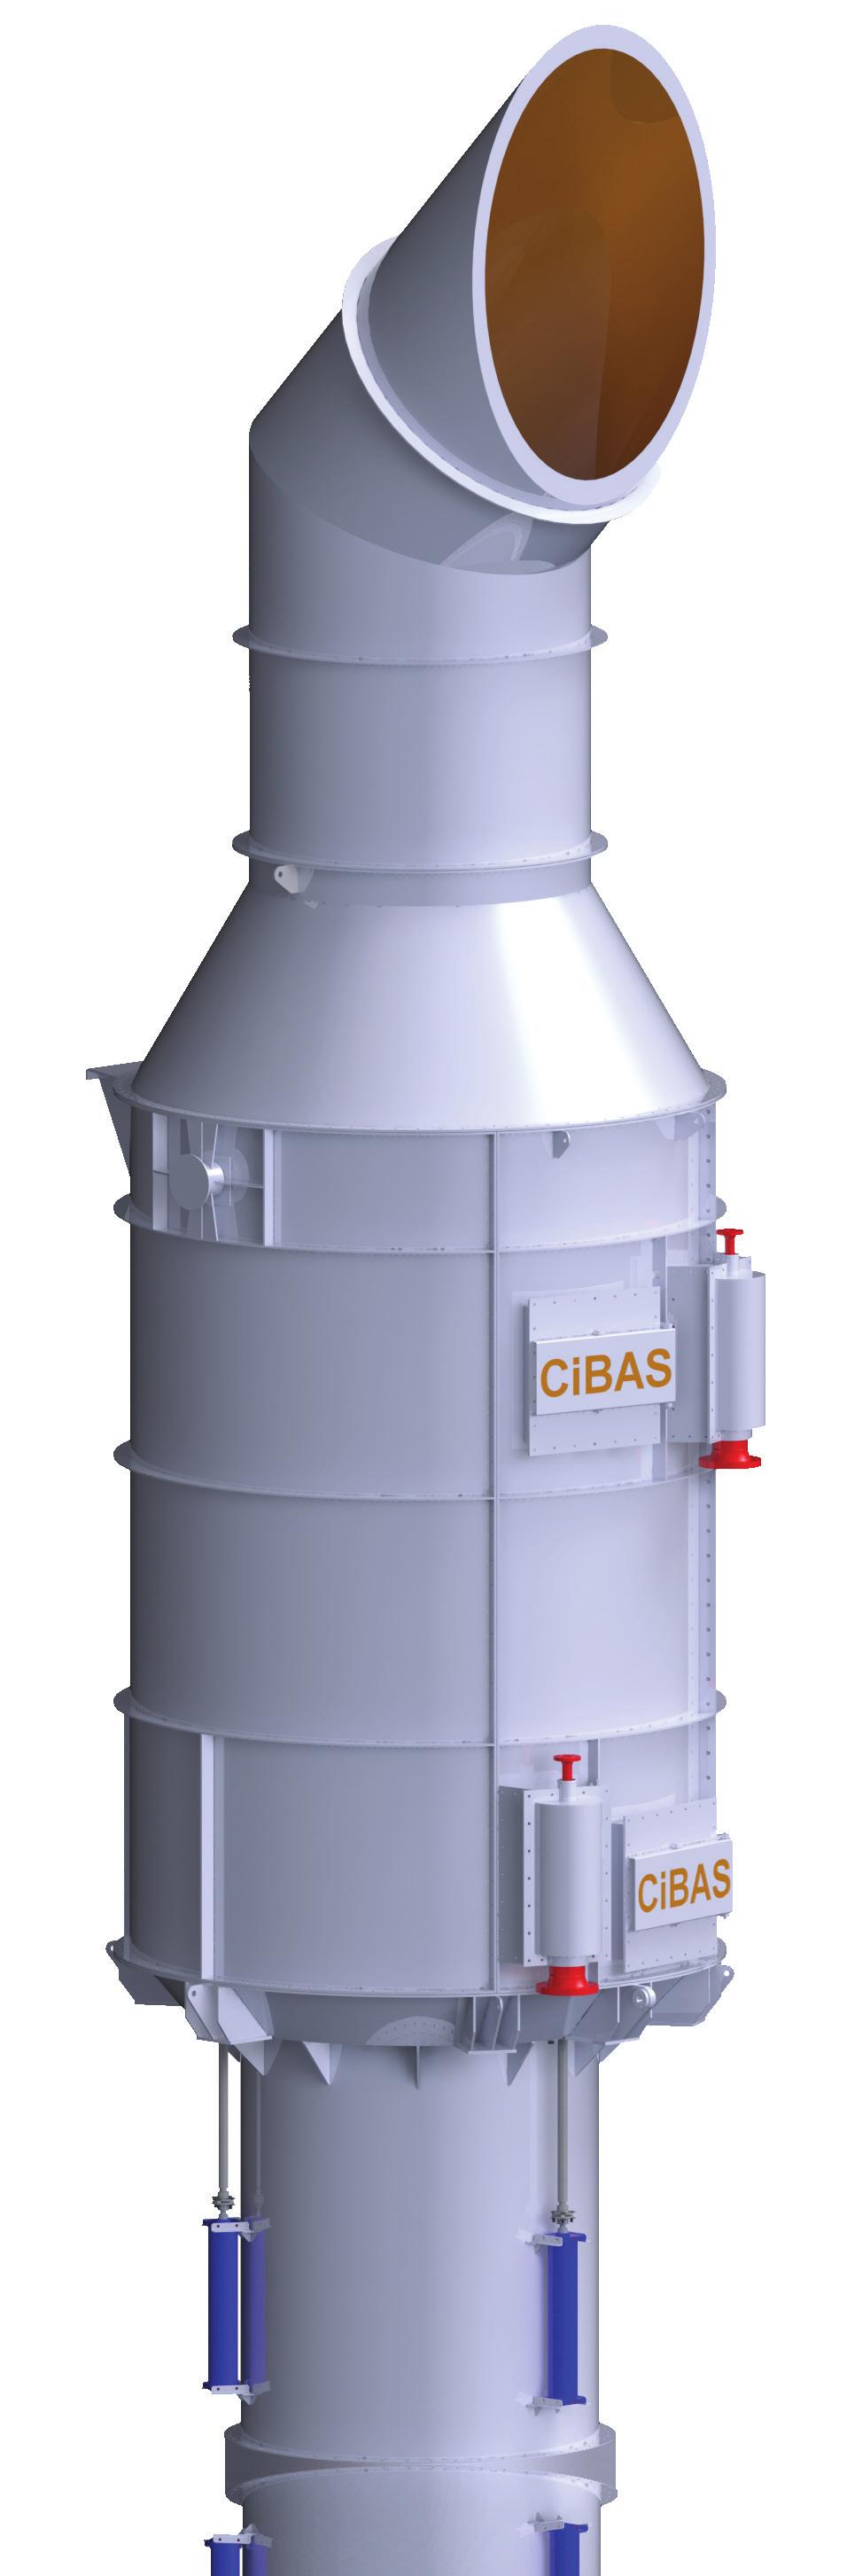 Introduction to CiBAS The most compact, lightweight and cost effective way of recovering heat from your gas turbine exhaust.